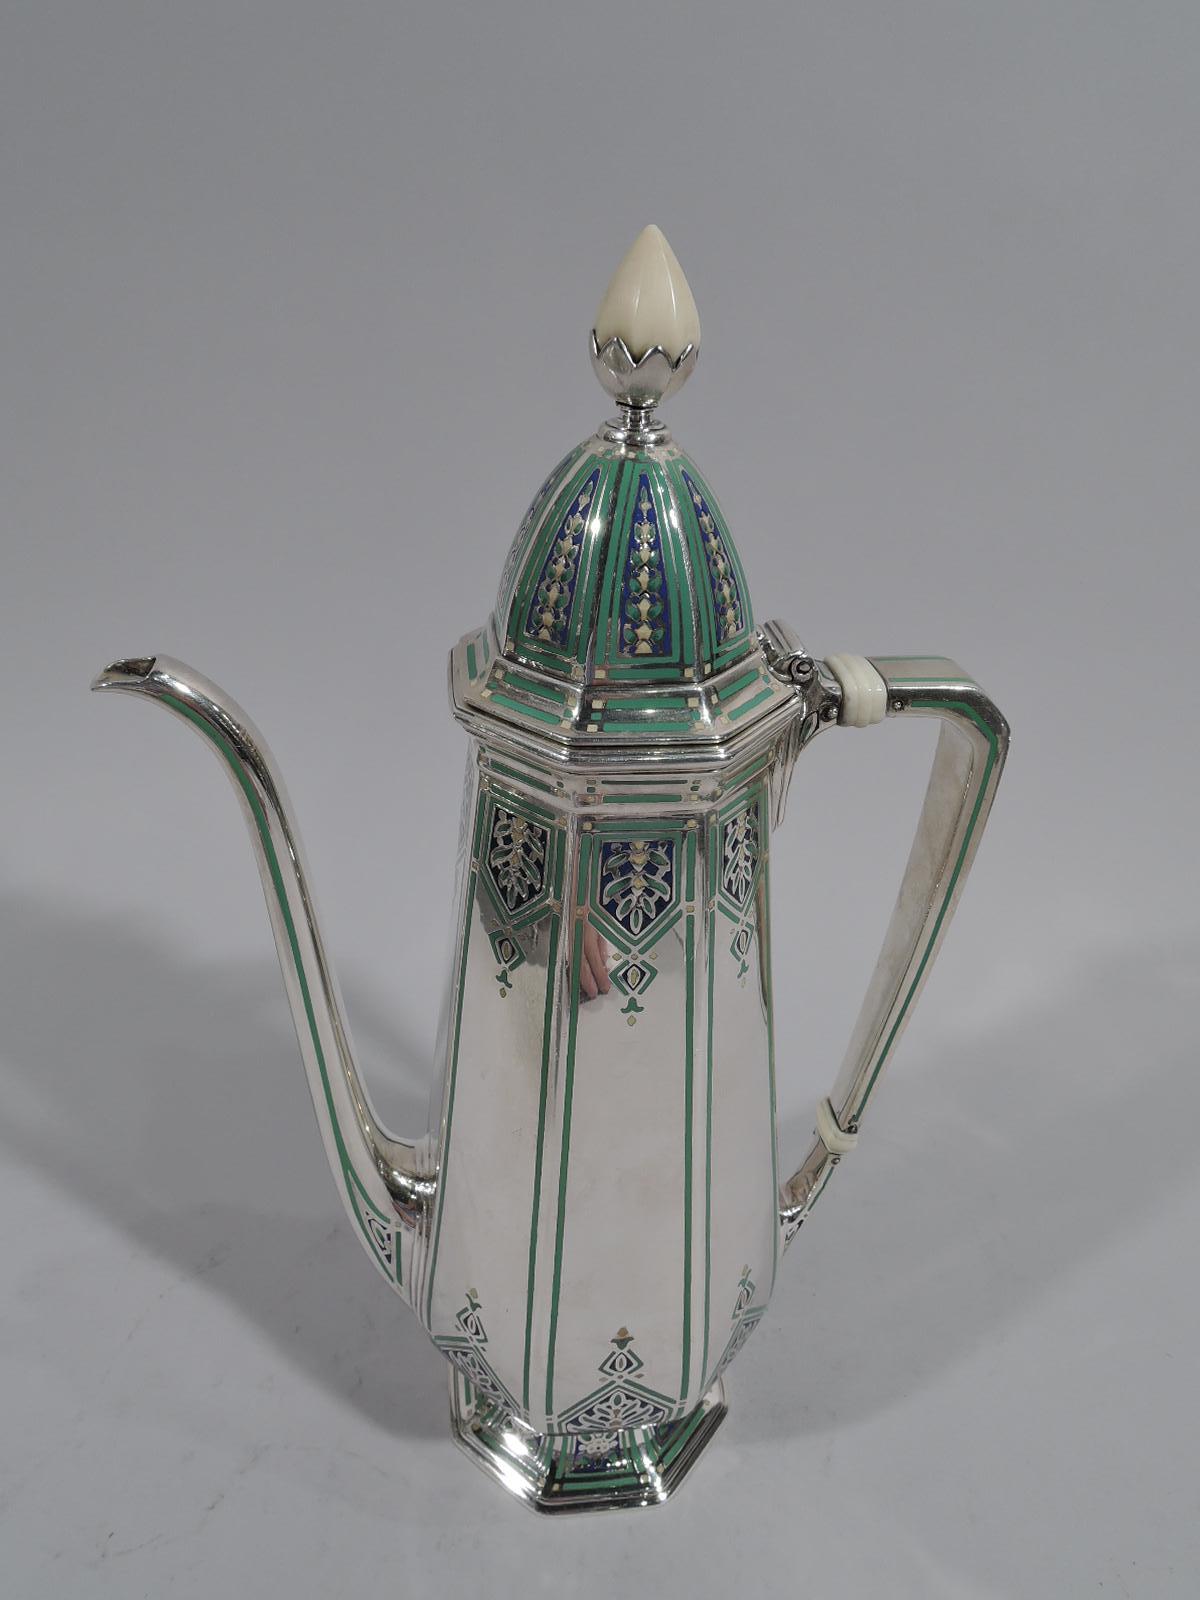 American Tiffany Enamel and Sterling Silver Coffee Set on Tray in Art Deco Style